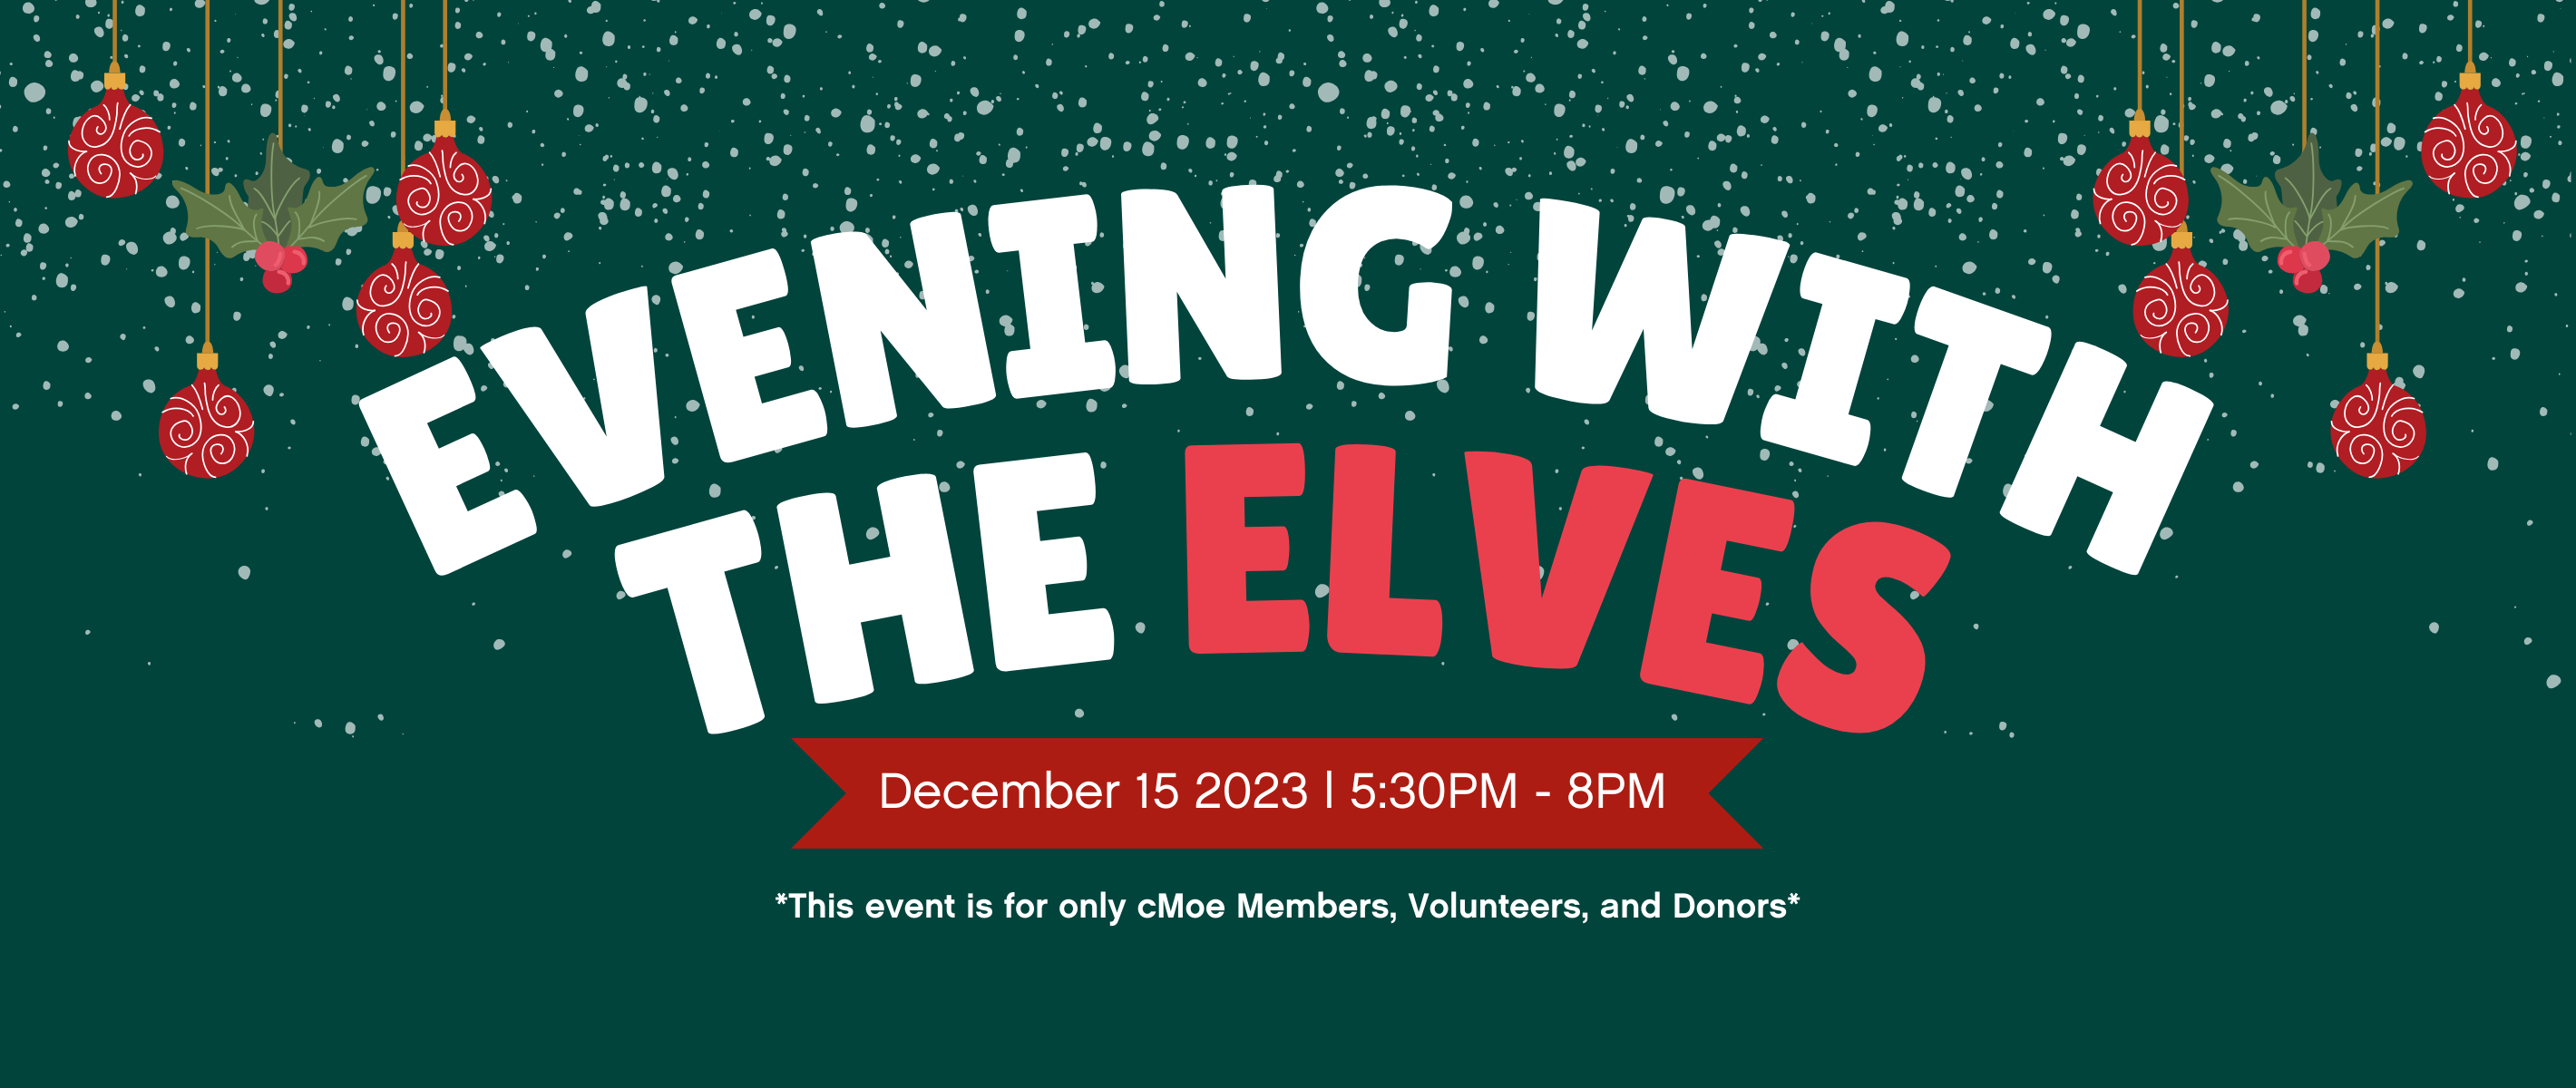 Evening with the Elves